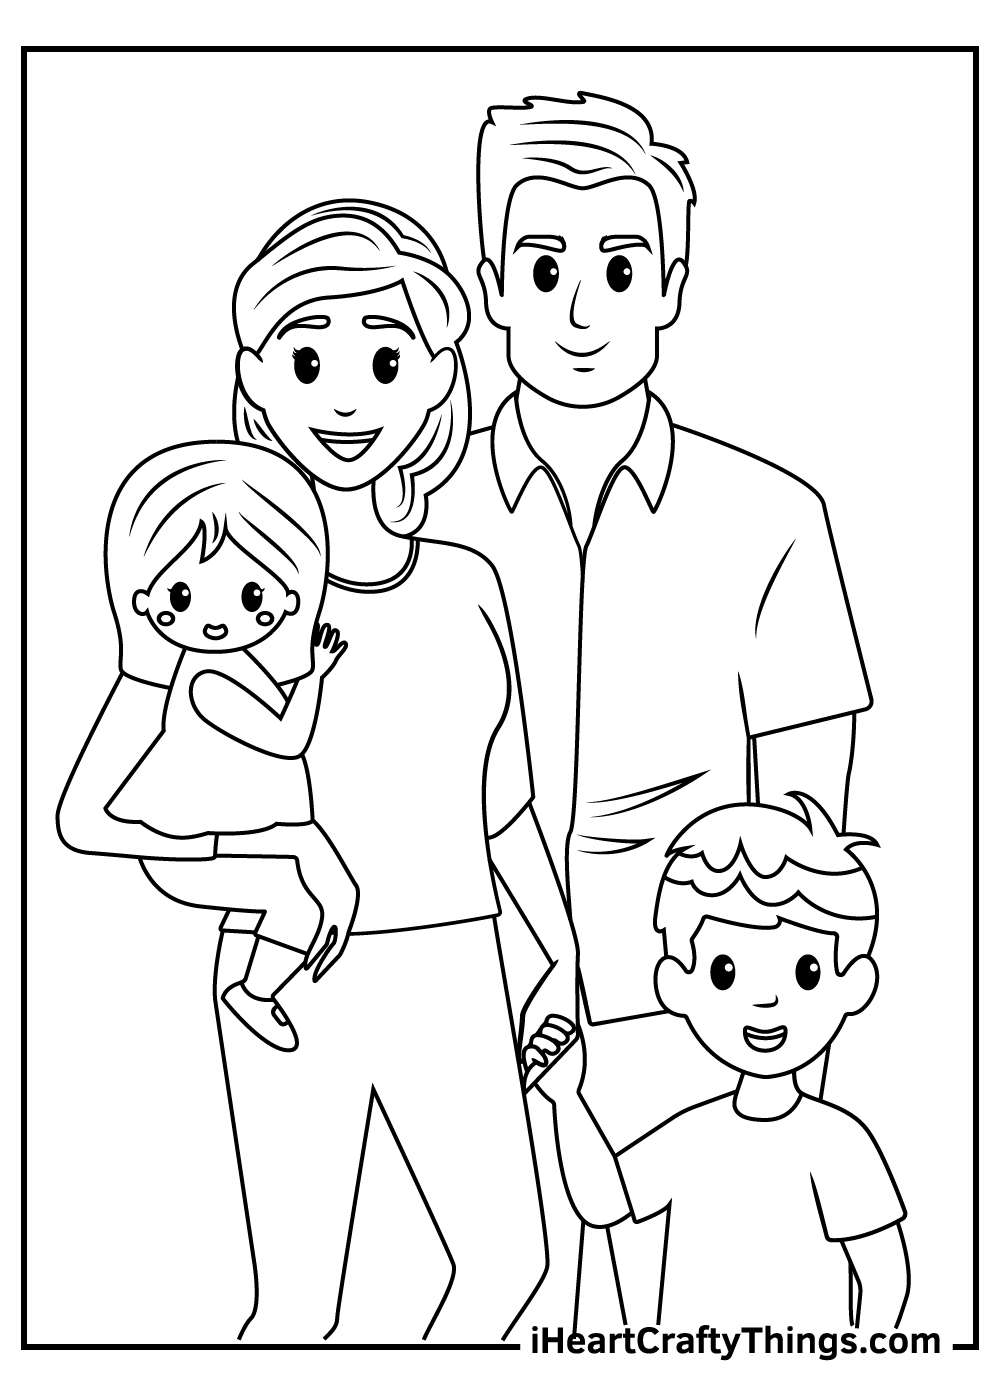 Printable Family Coloring Pages Updated 2021